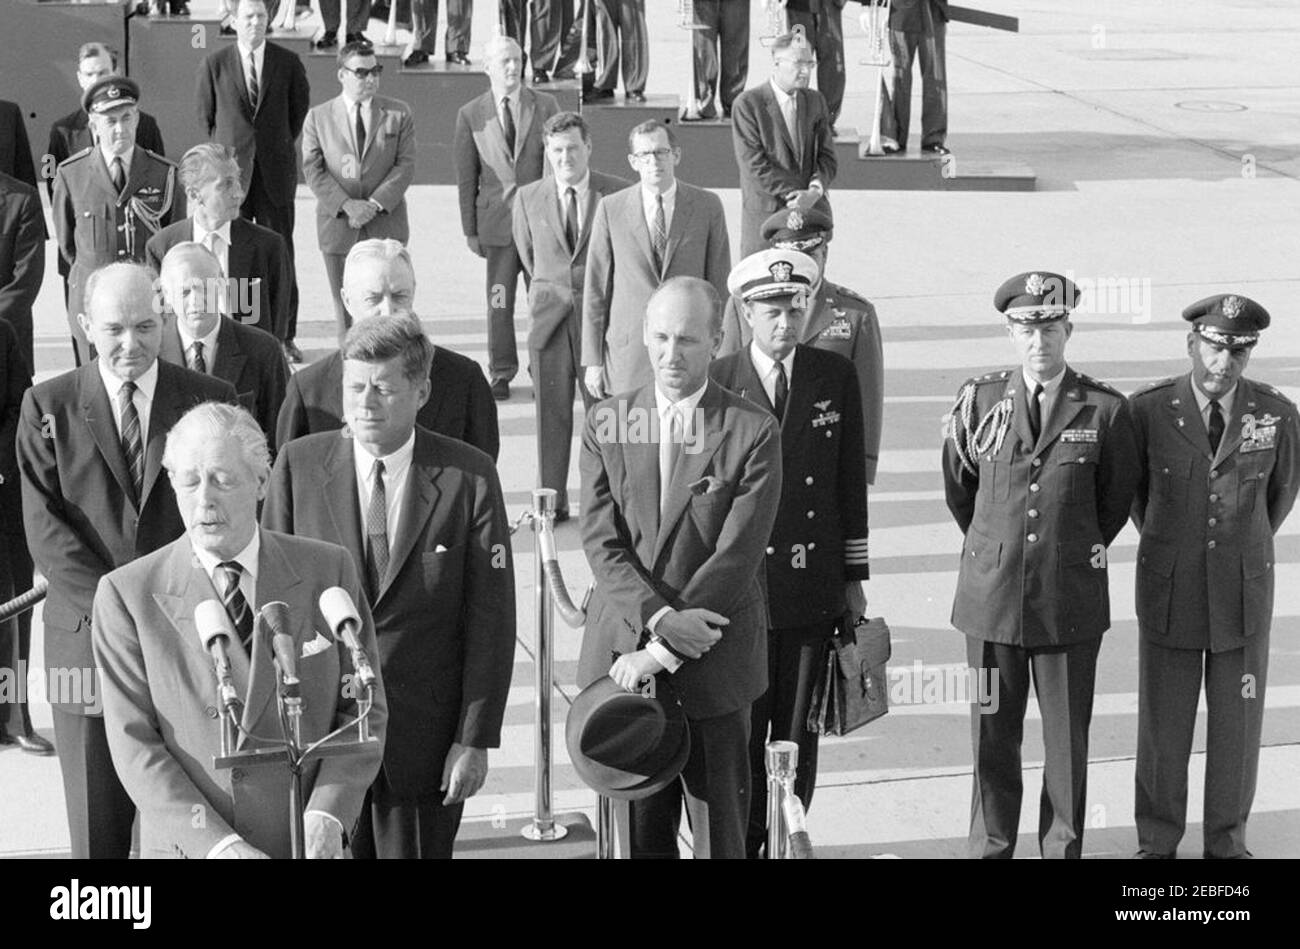 Arrival ceremonies for Harold Macmillan, Prime Minister of Great Britain, 4:50PM. Prime Minister of Great Britain, Harold Macmillan, delivers remarks during arrival ceremonies in his honor. Standing on reviewing platform (L-R): Secretary of State, Dean Rusk; Prime Minister Macmillan (at microphones); President John F. Kennedy; United States Ambassador to Great Britain, David K. E. Bruce (partially hidden behind President Kennedy); and Chief of Protocol, Angier Biddle Duke. Also pictured: Secretary of the PMu2019s Cabinet, Sir Norman Brook; Minister in the British Embassy, Lord Hood (Viscount Stock Photo